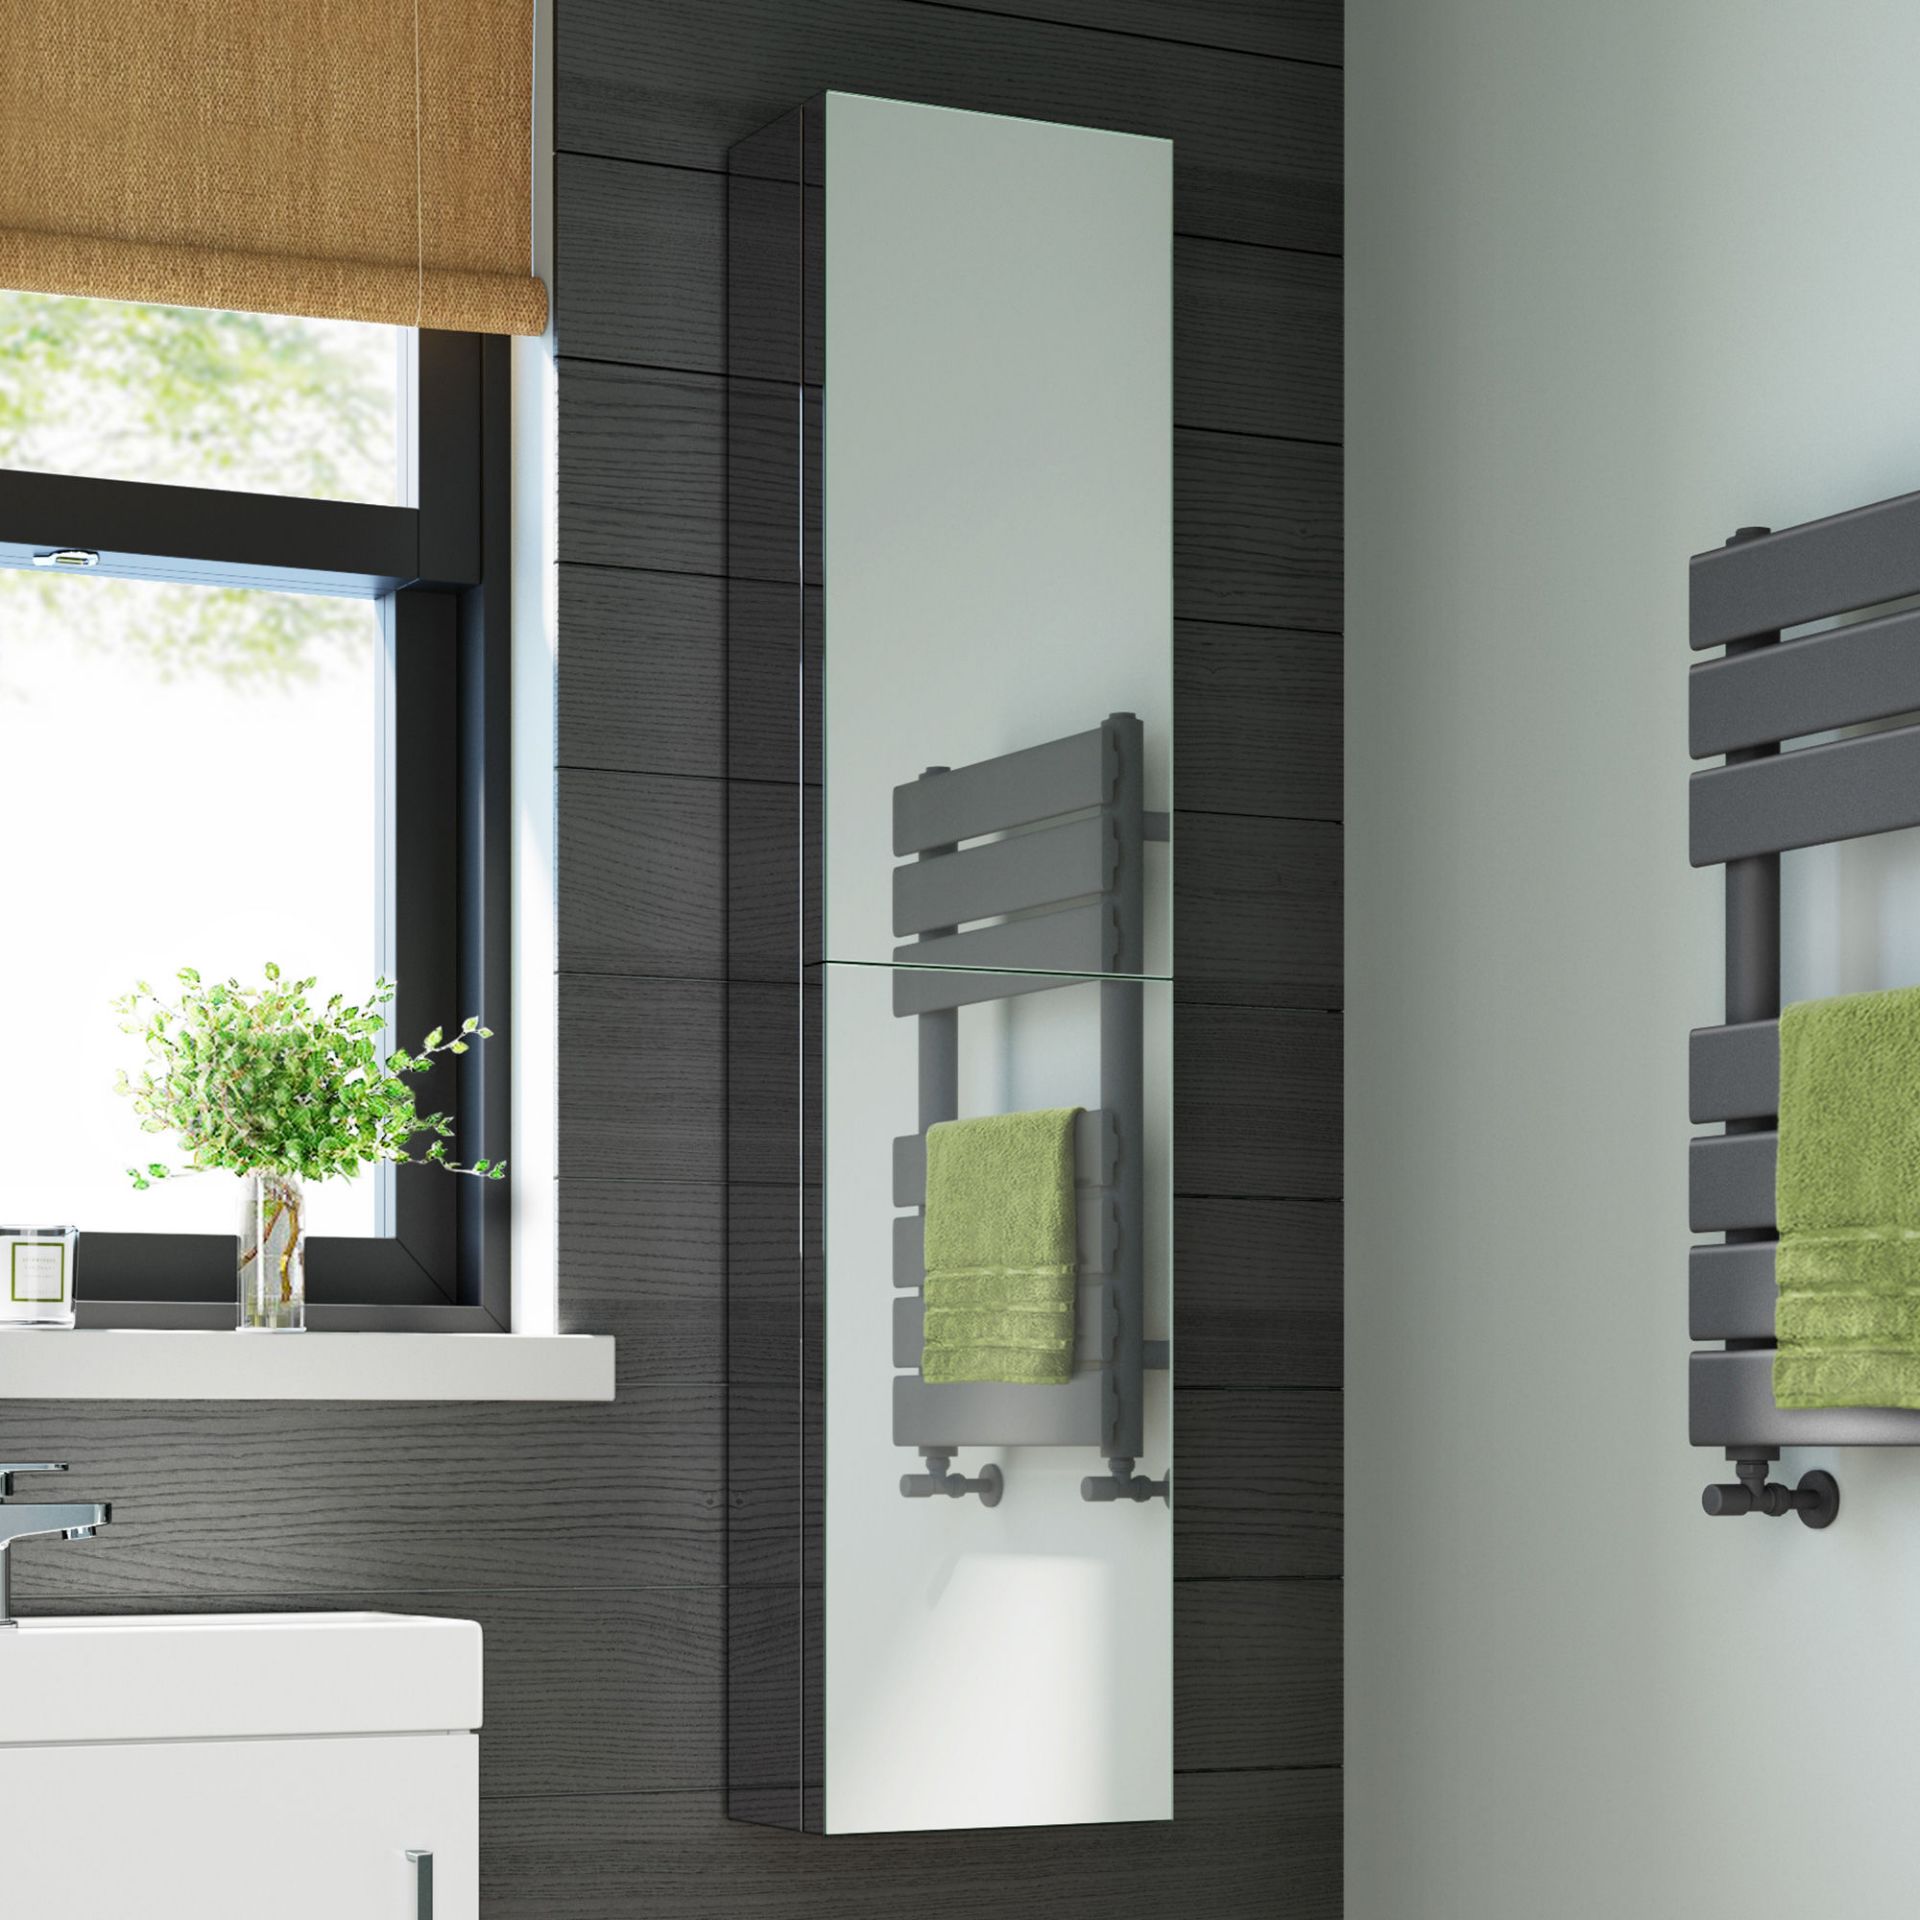 (EY83) 300x1300mm Liberty Stainless Steel Tall Mirror Cabinet. RRP £239.99. Made from high-grade